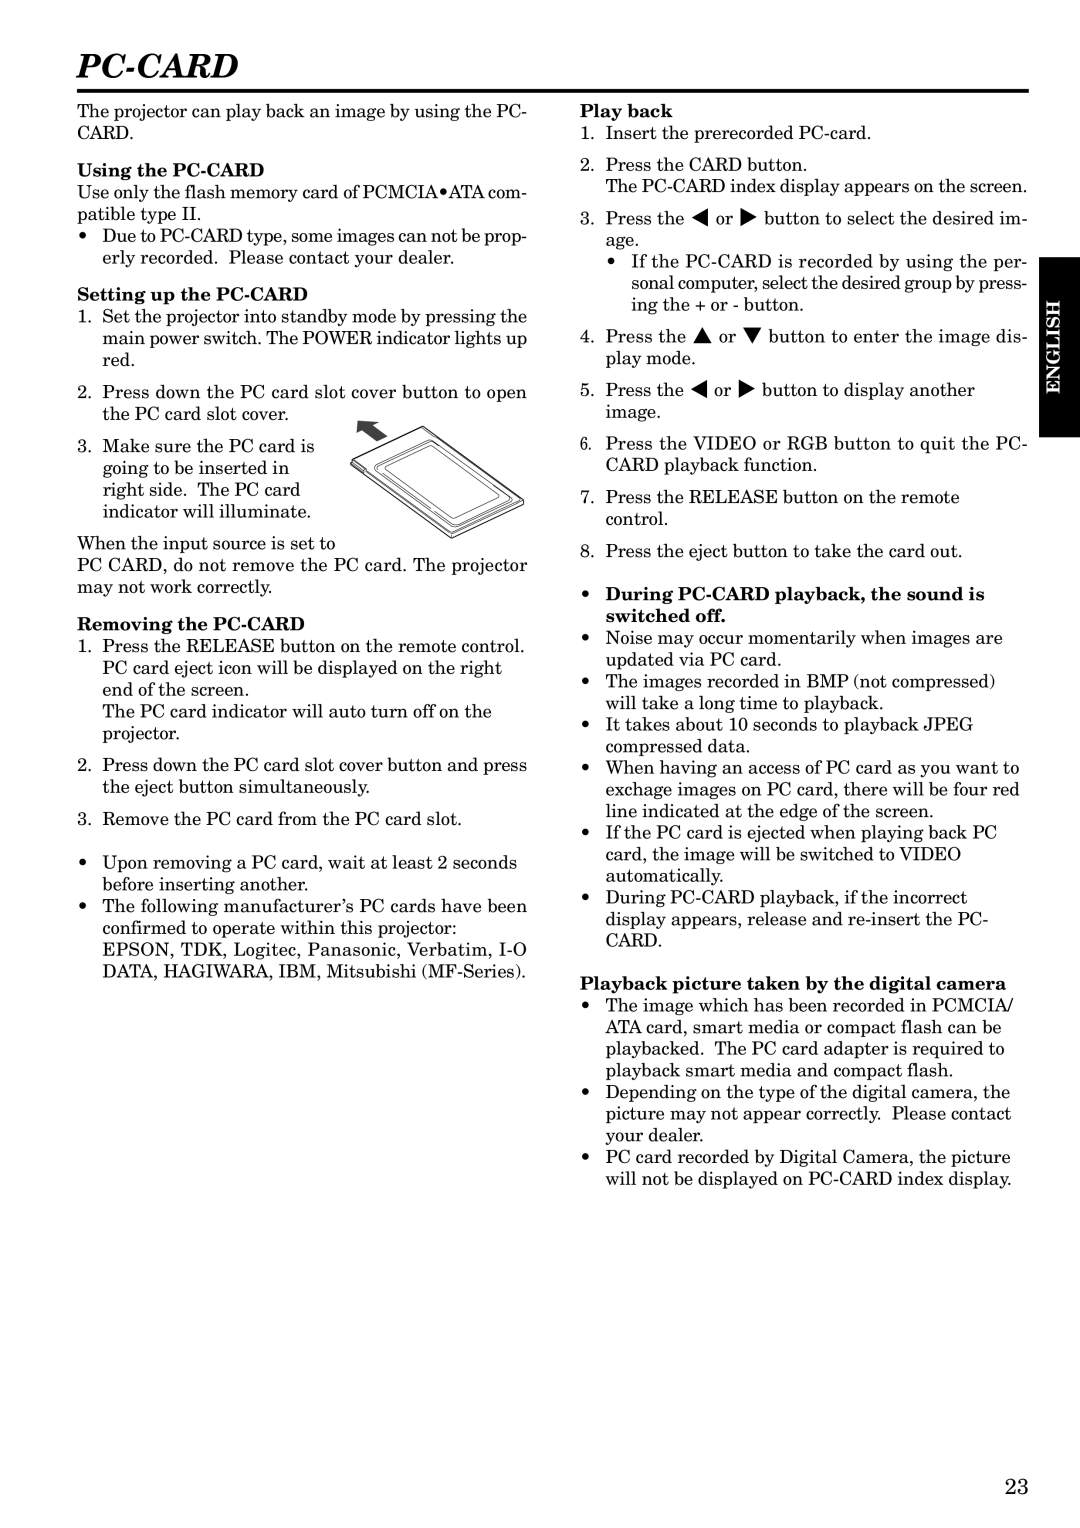 Mitsubishi Electronics LVP-S120A user manual Using the PC-CARD, Setting up the PC-CARD, Removing the PC-CARD, Play back 